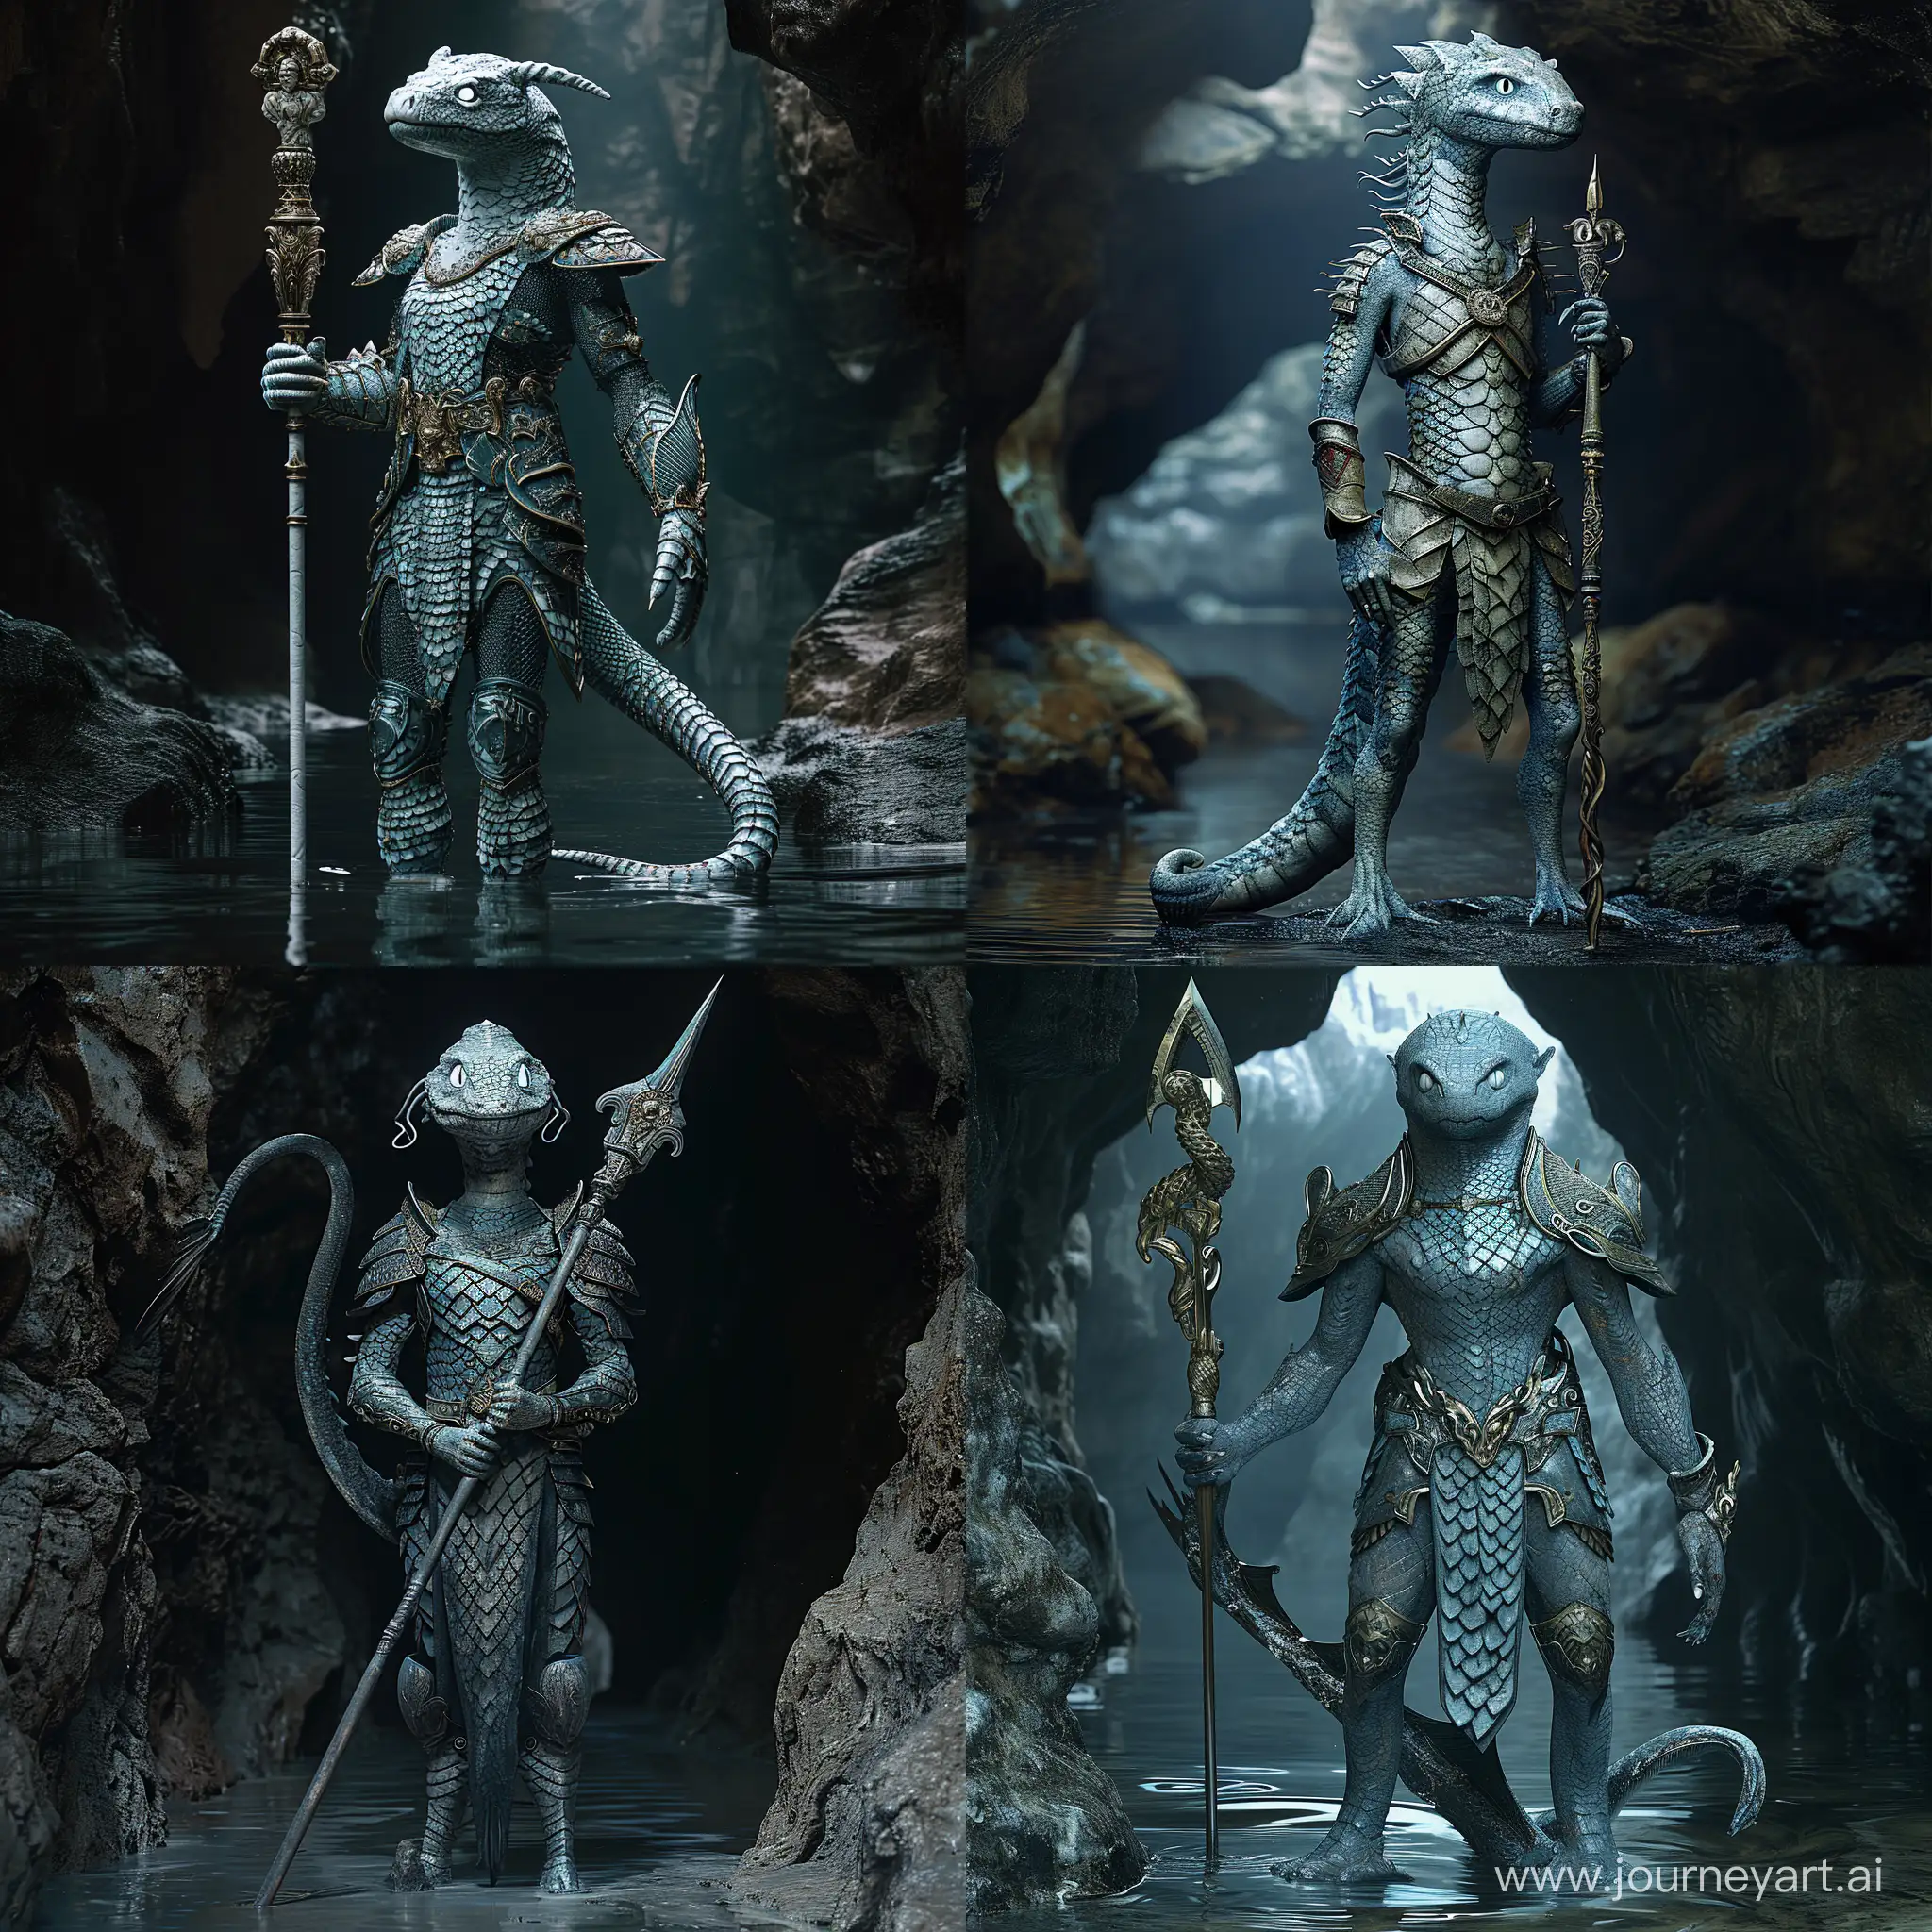 A sea serpent-like guard standing upright, scaled skin with two arms and a tail, blue-grey hue, white eyes, armed with an ornate pike, royal armor, in a damp dark cavern, highly detailed, photorealistic